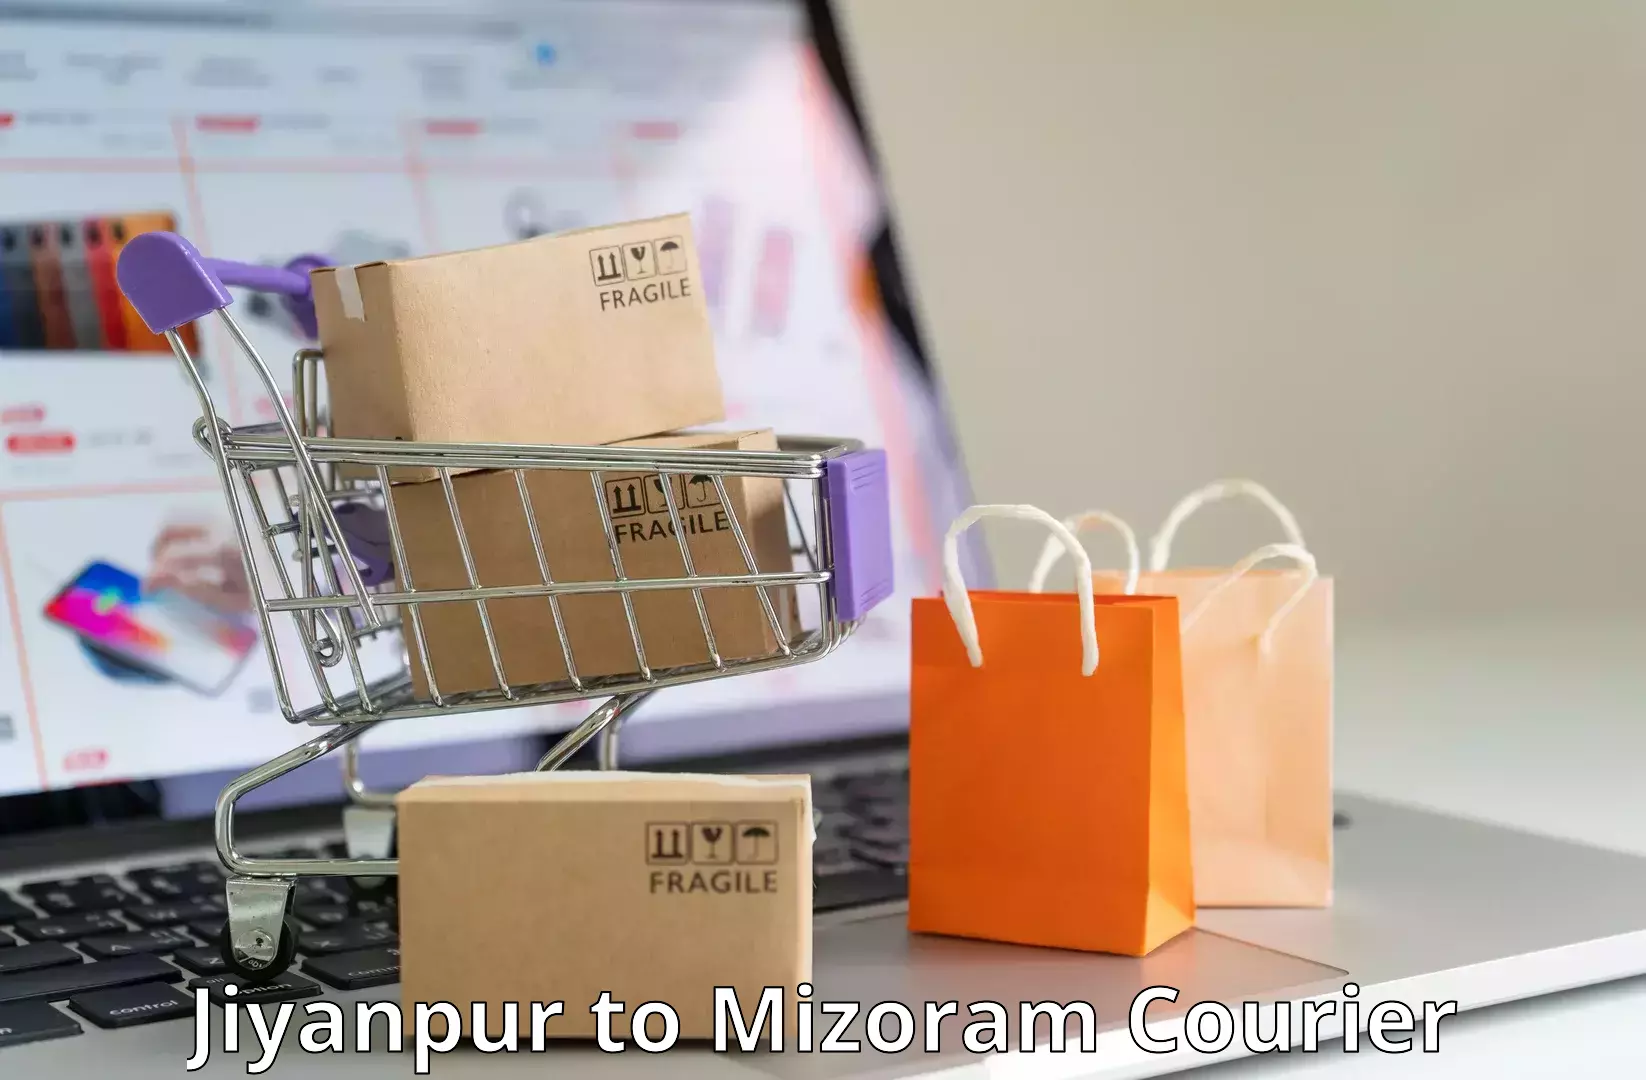 On-demand courier Jiyanpur to Aizawl